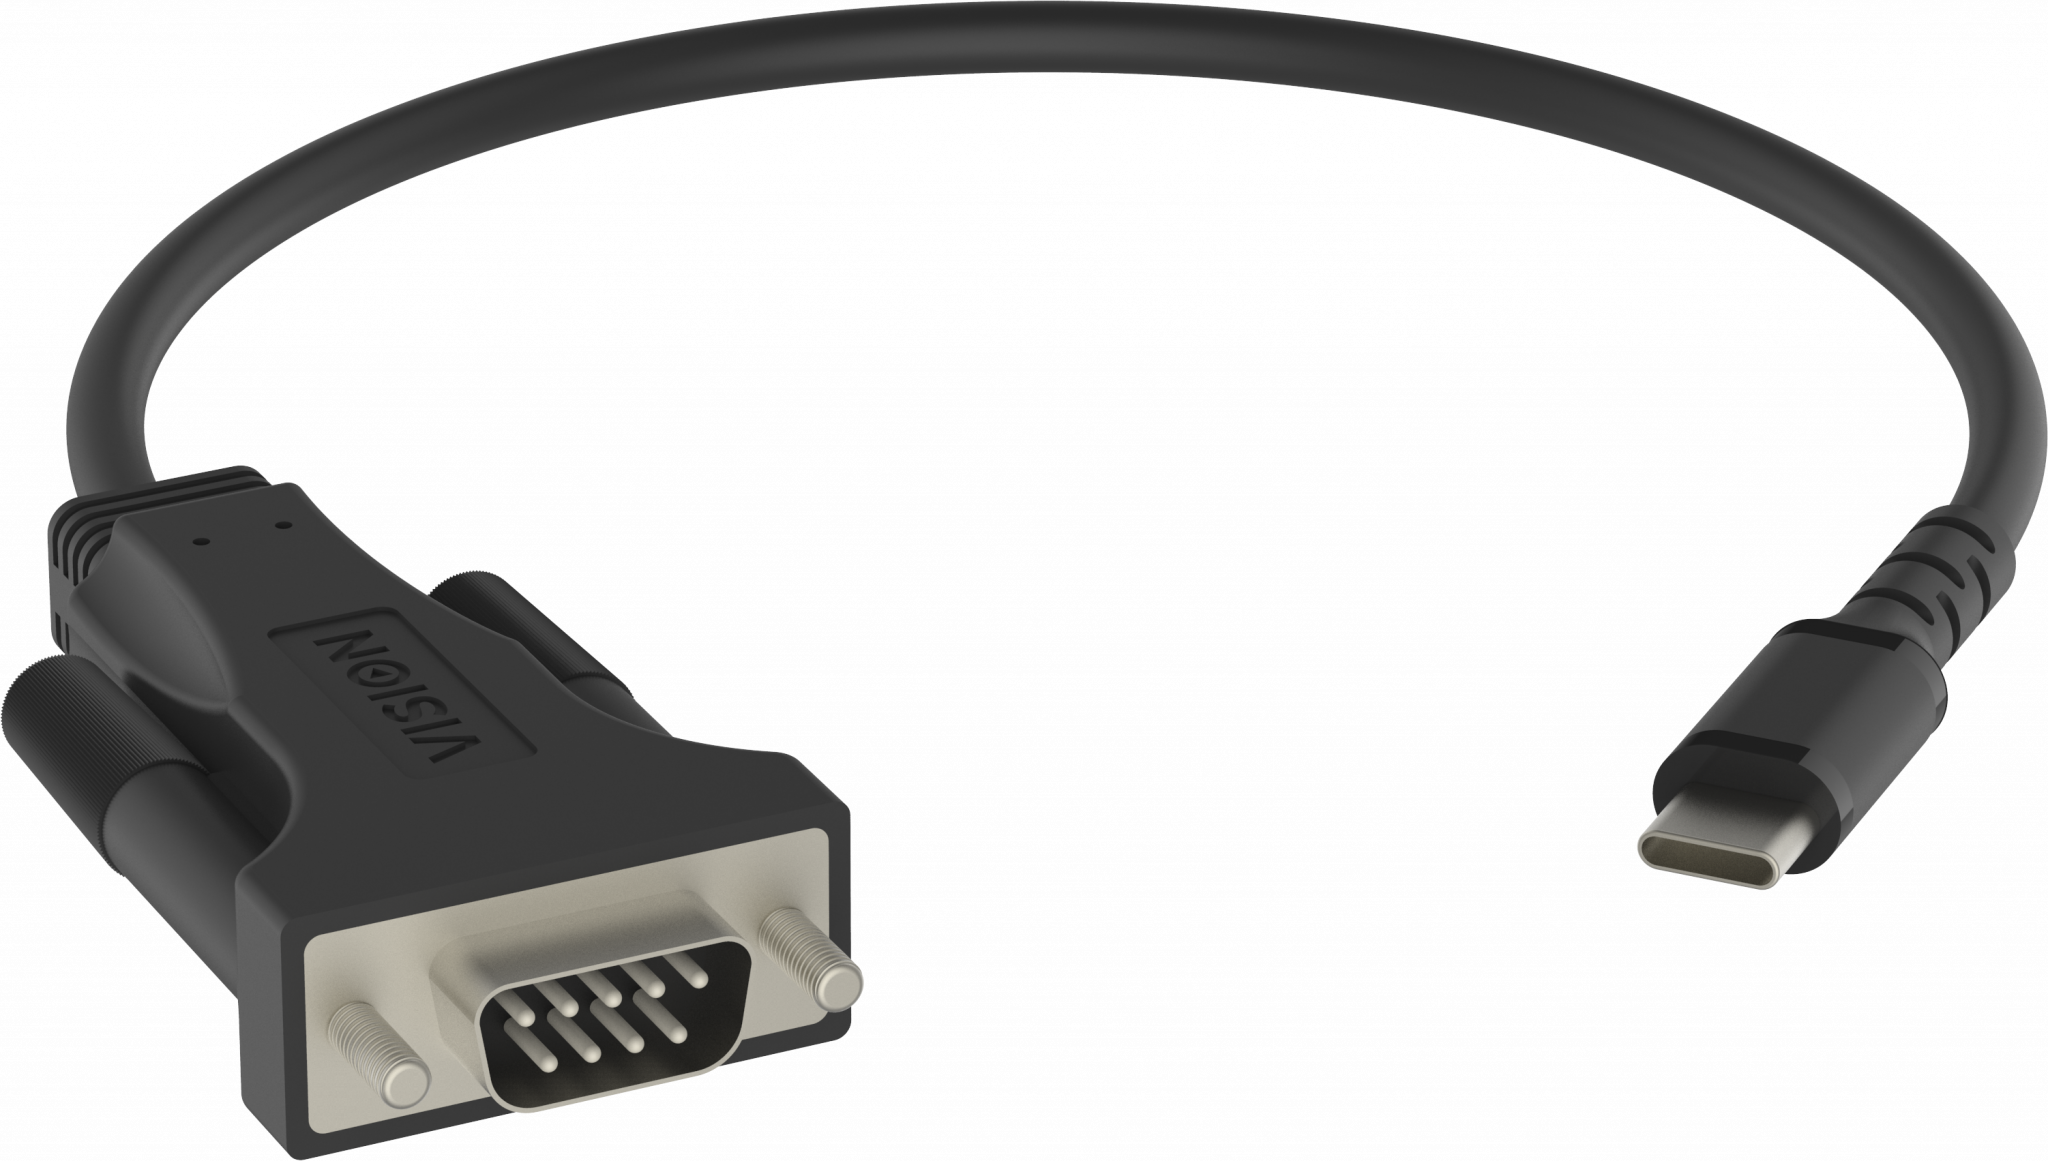 An image showing USB-C RS-232 Serial Adaptor